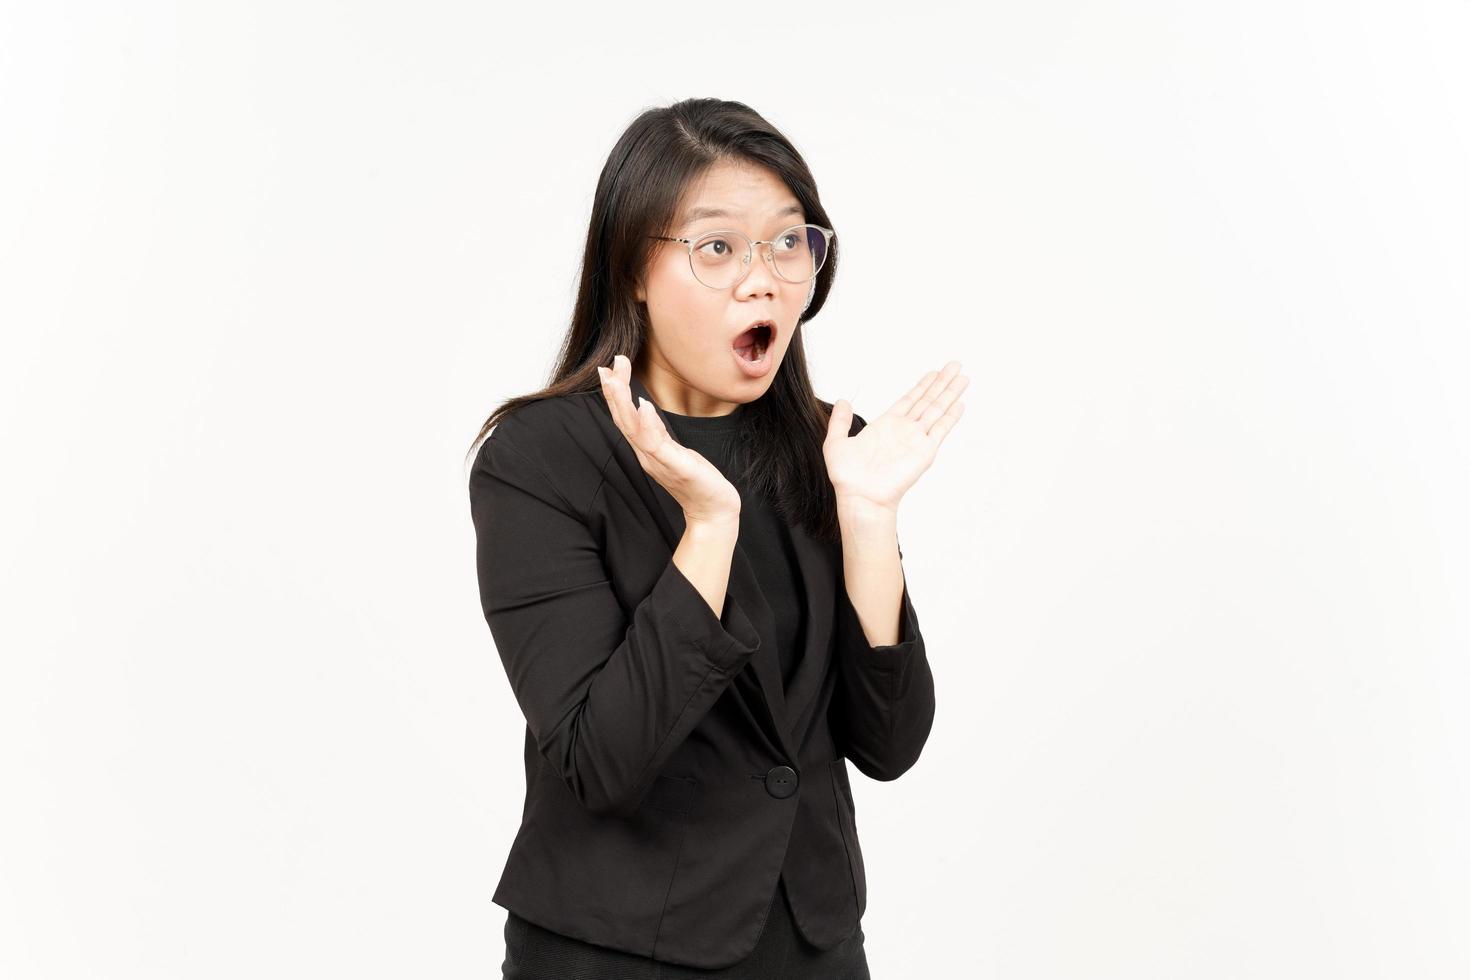 WOW and Shocked Face Expression Of Beautiful Asian Woman Wearing Black Blazer Isolated On White photo